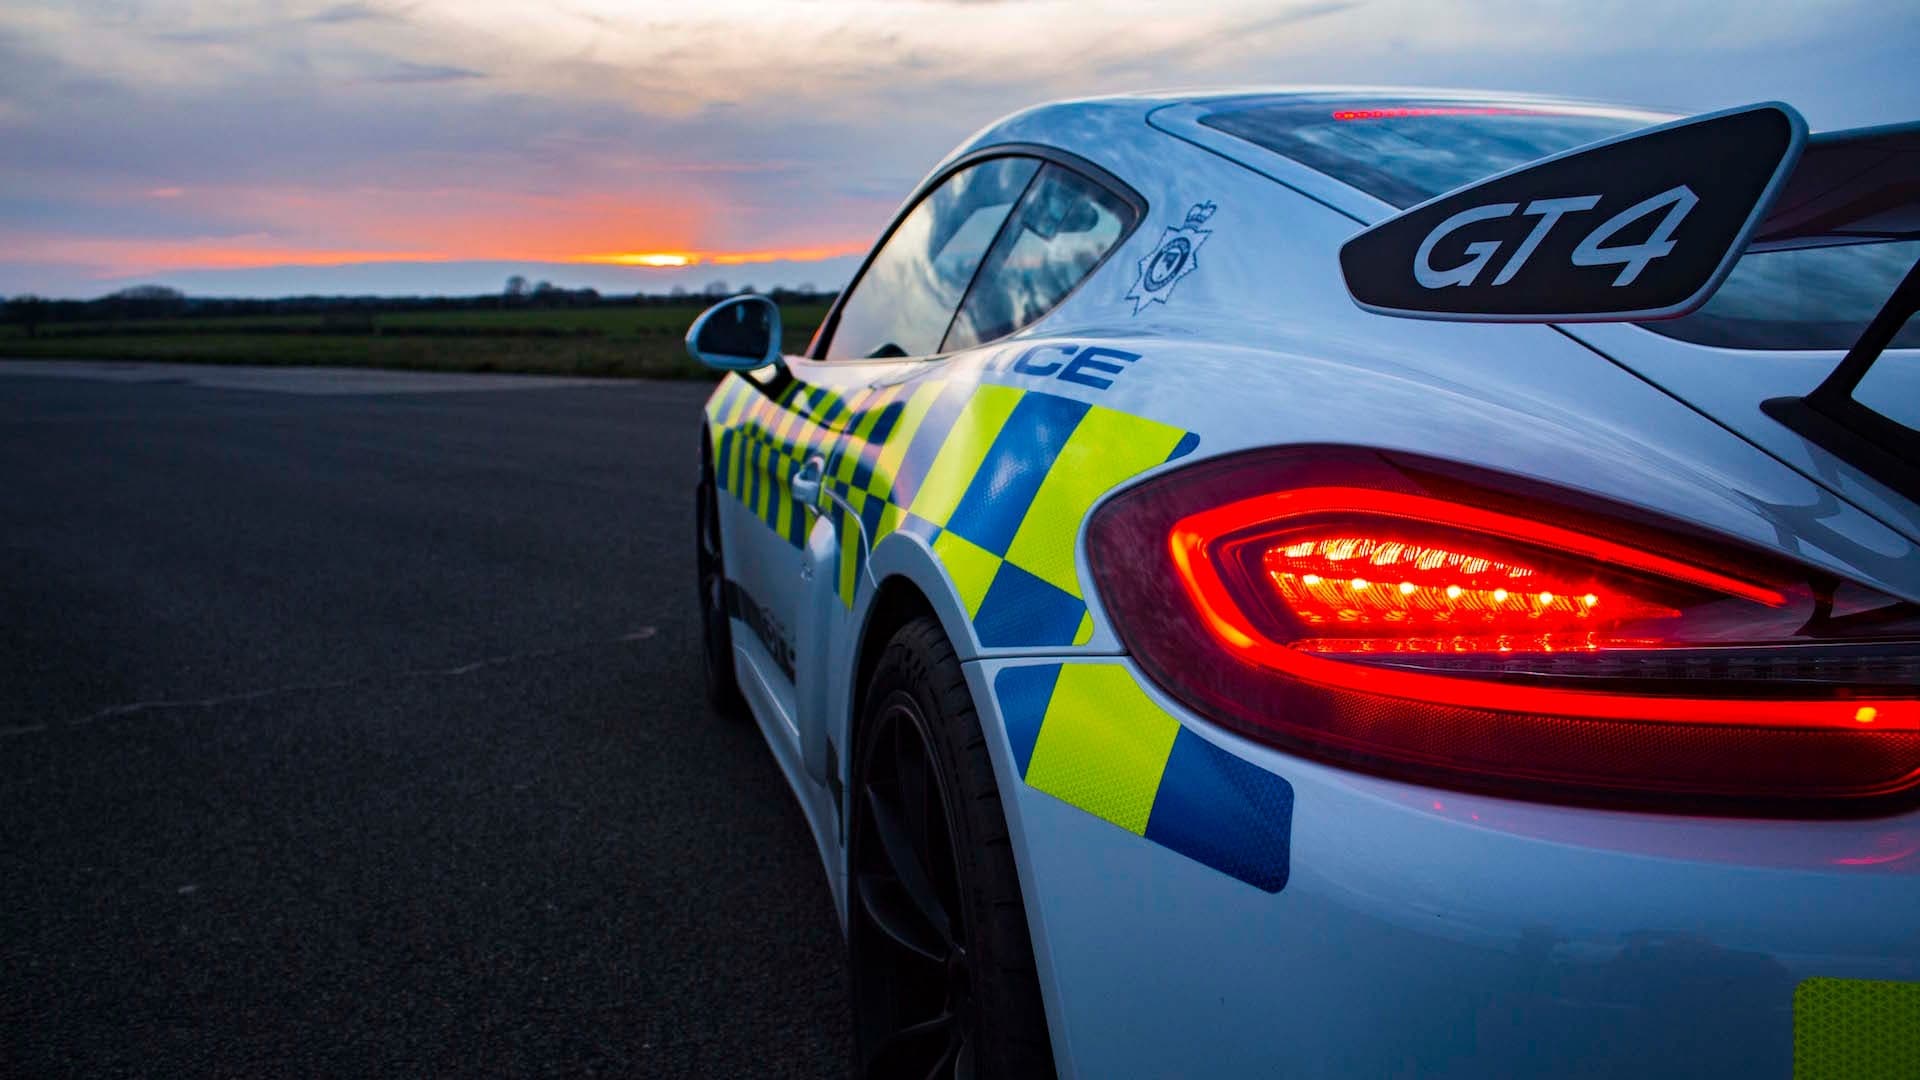 British Police Department Gifted a Porsche Cayman GT4 to Educate Young Drivers